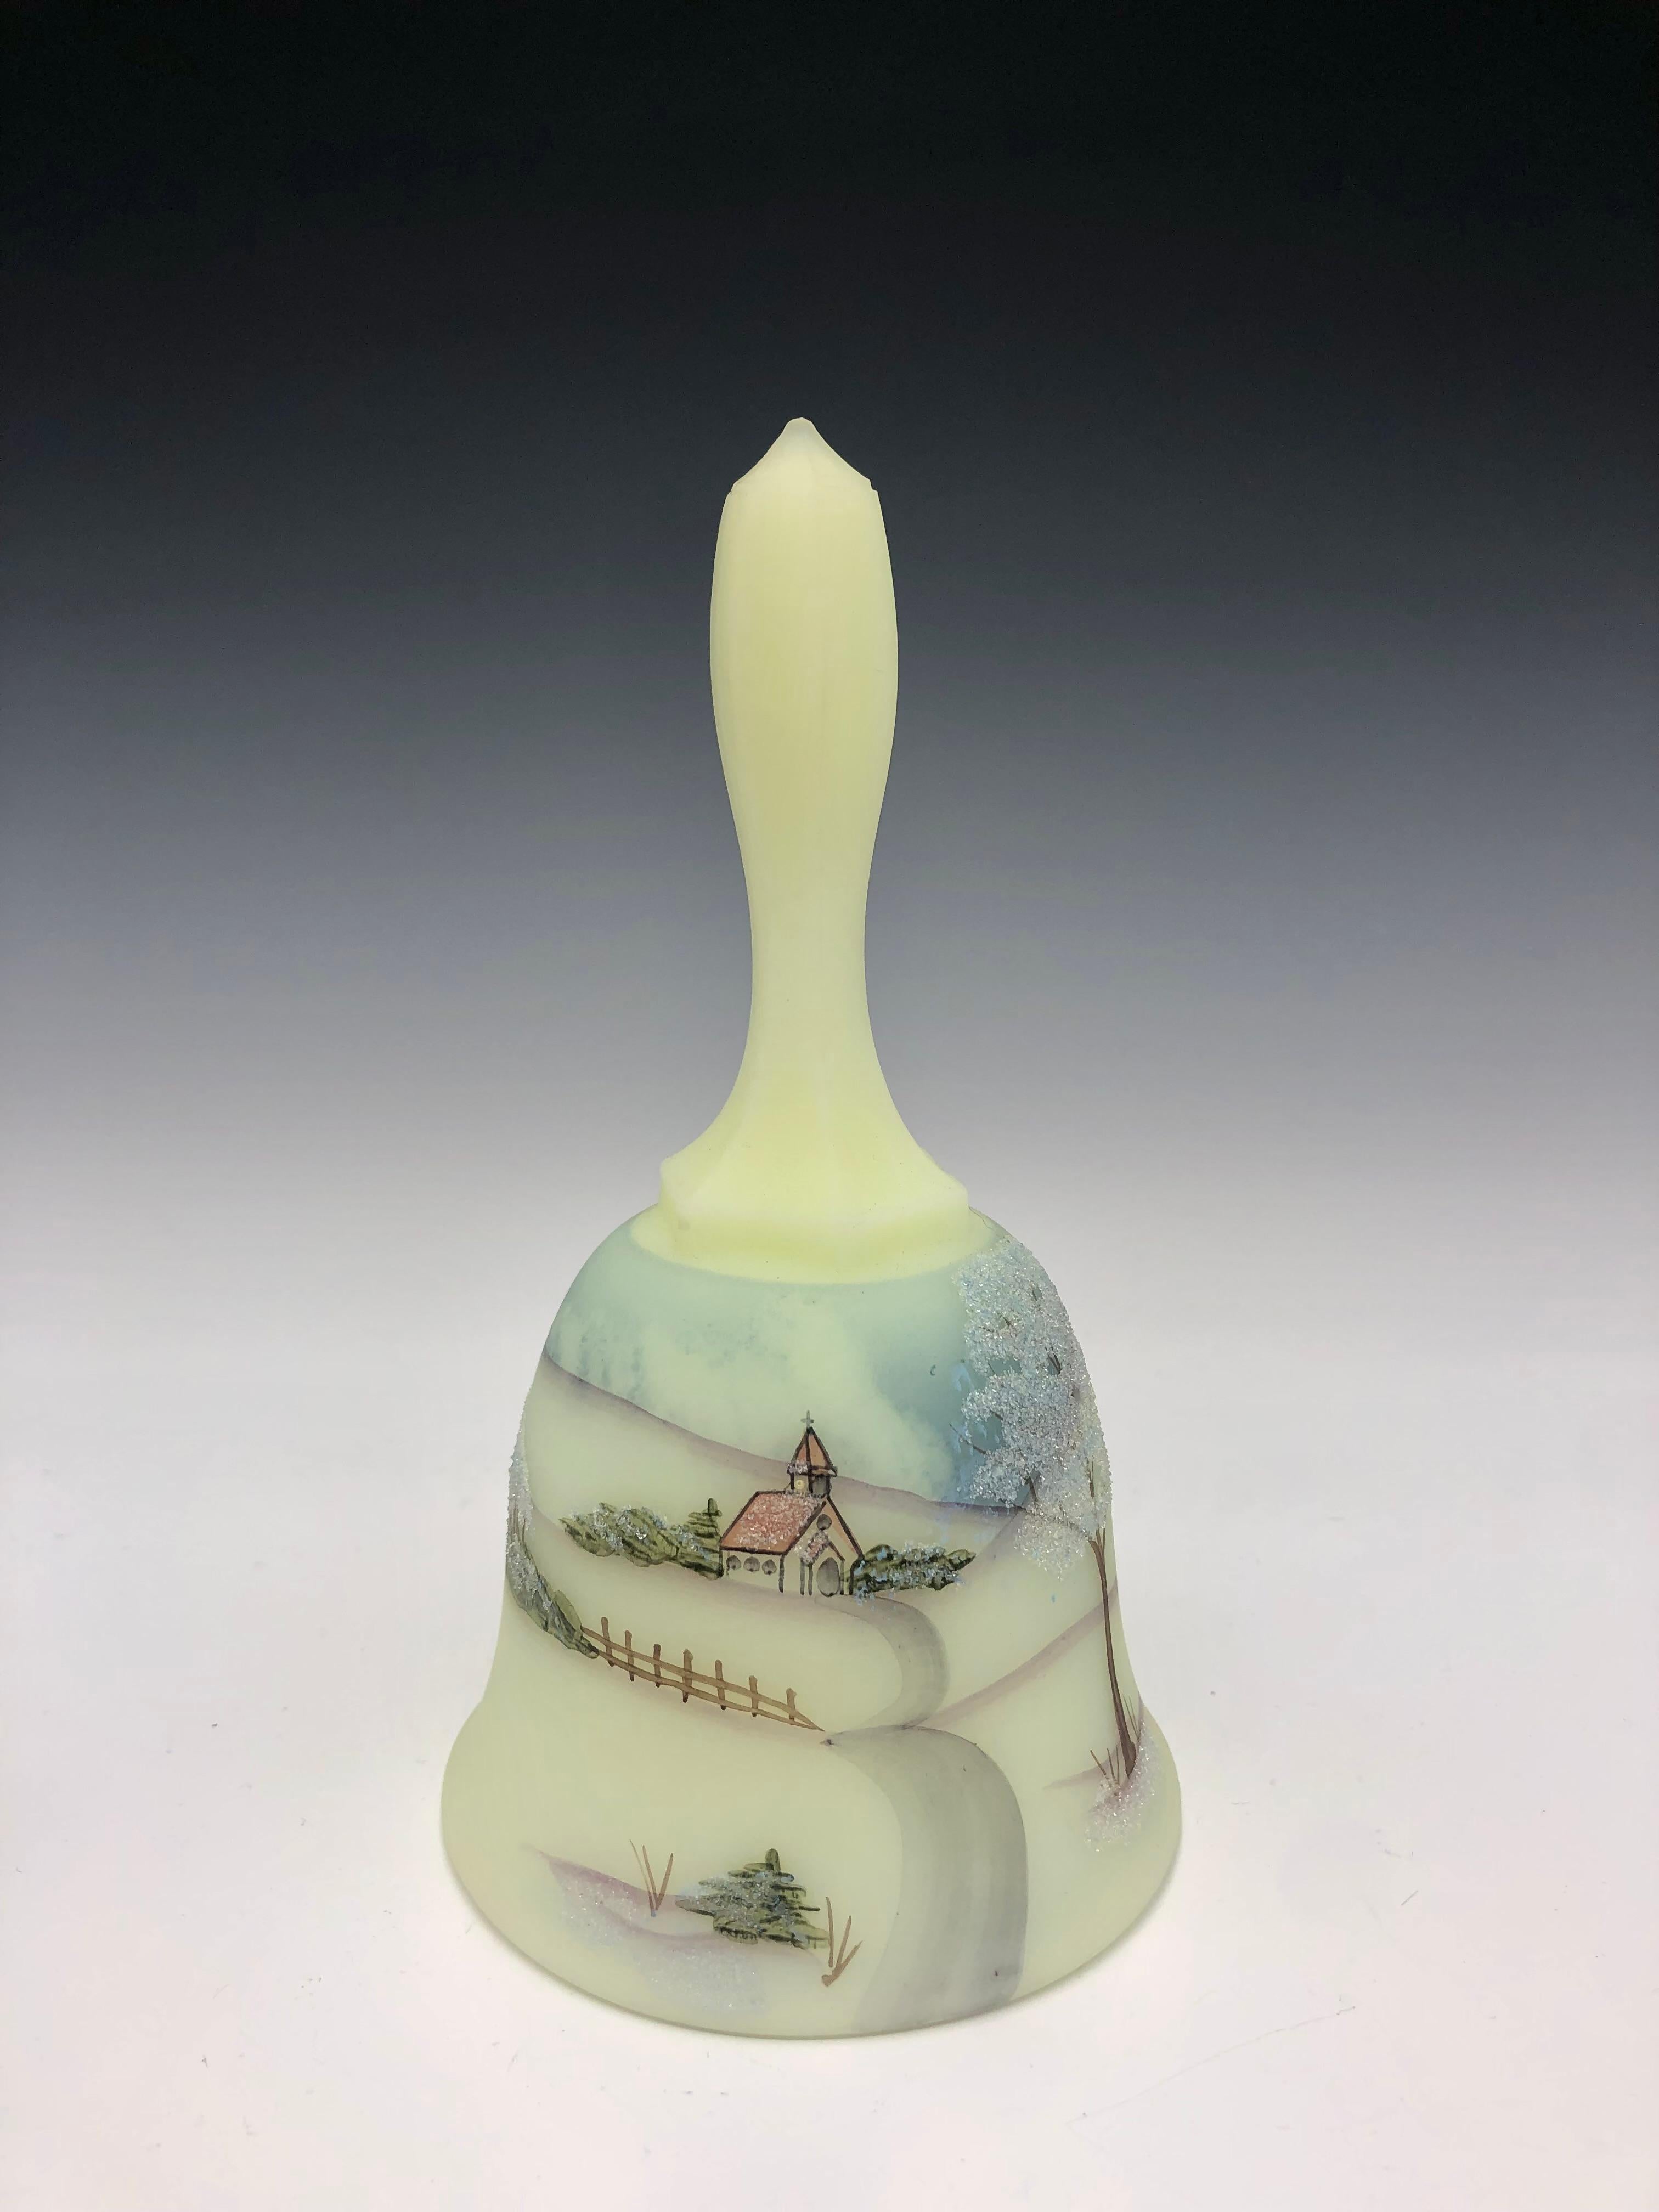 Pale green/yellow Fenton vaseline custard glass bell adorned with delicately painted winter country church scene. 

The bell is hand-painted and signed on the interior by artist S. Meunier; a charming, beautifully crafted item made in 1980 as part